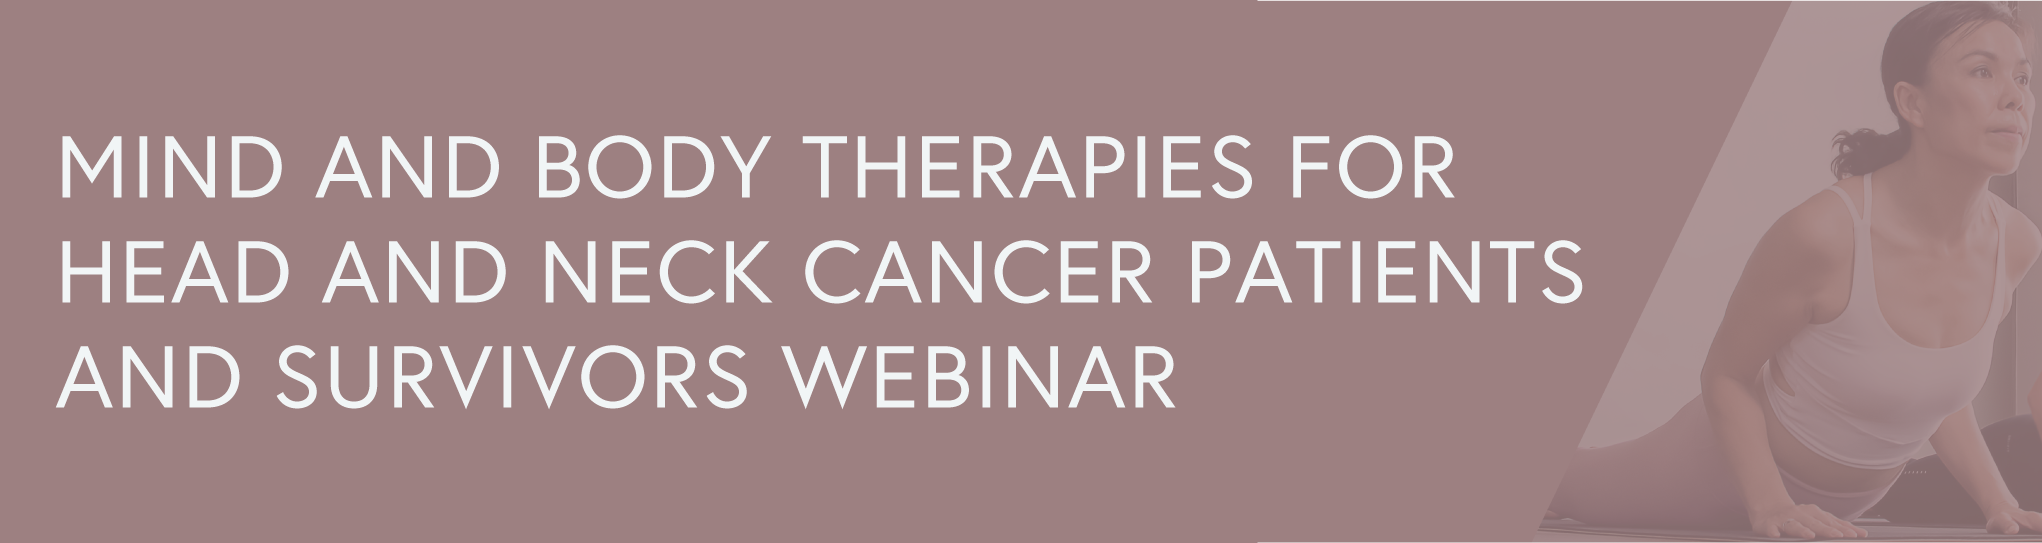 Mind and Body Therapies for Head and Neck Cancer Patients and Survivors